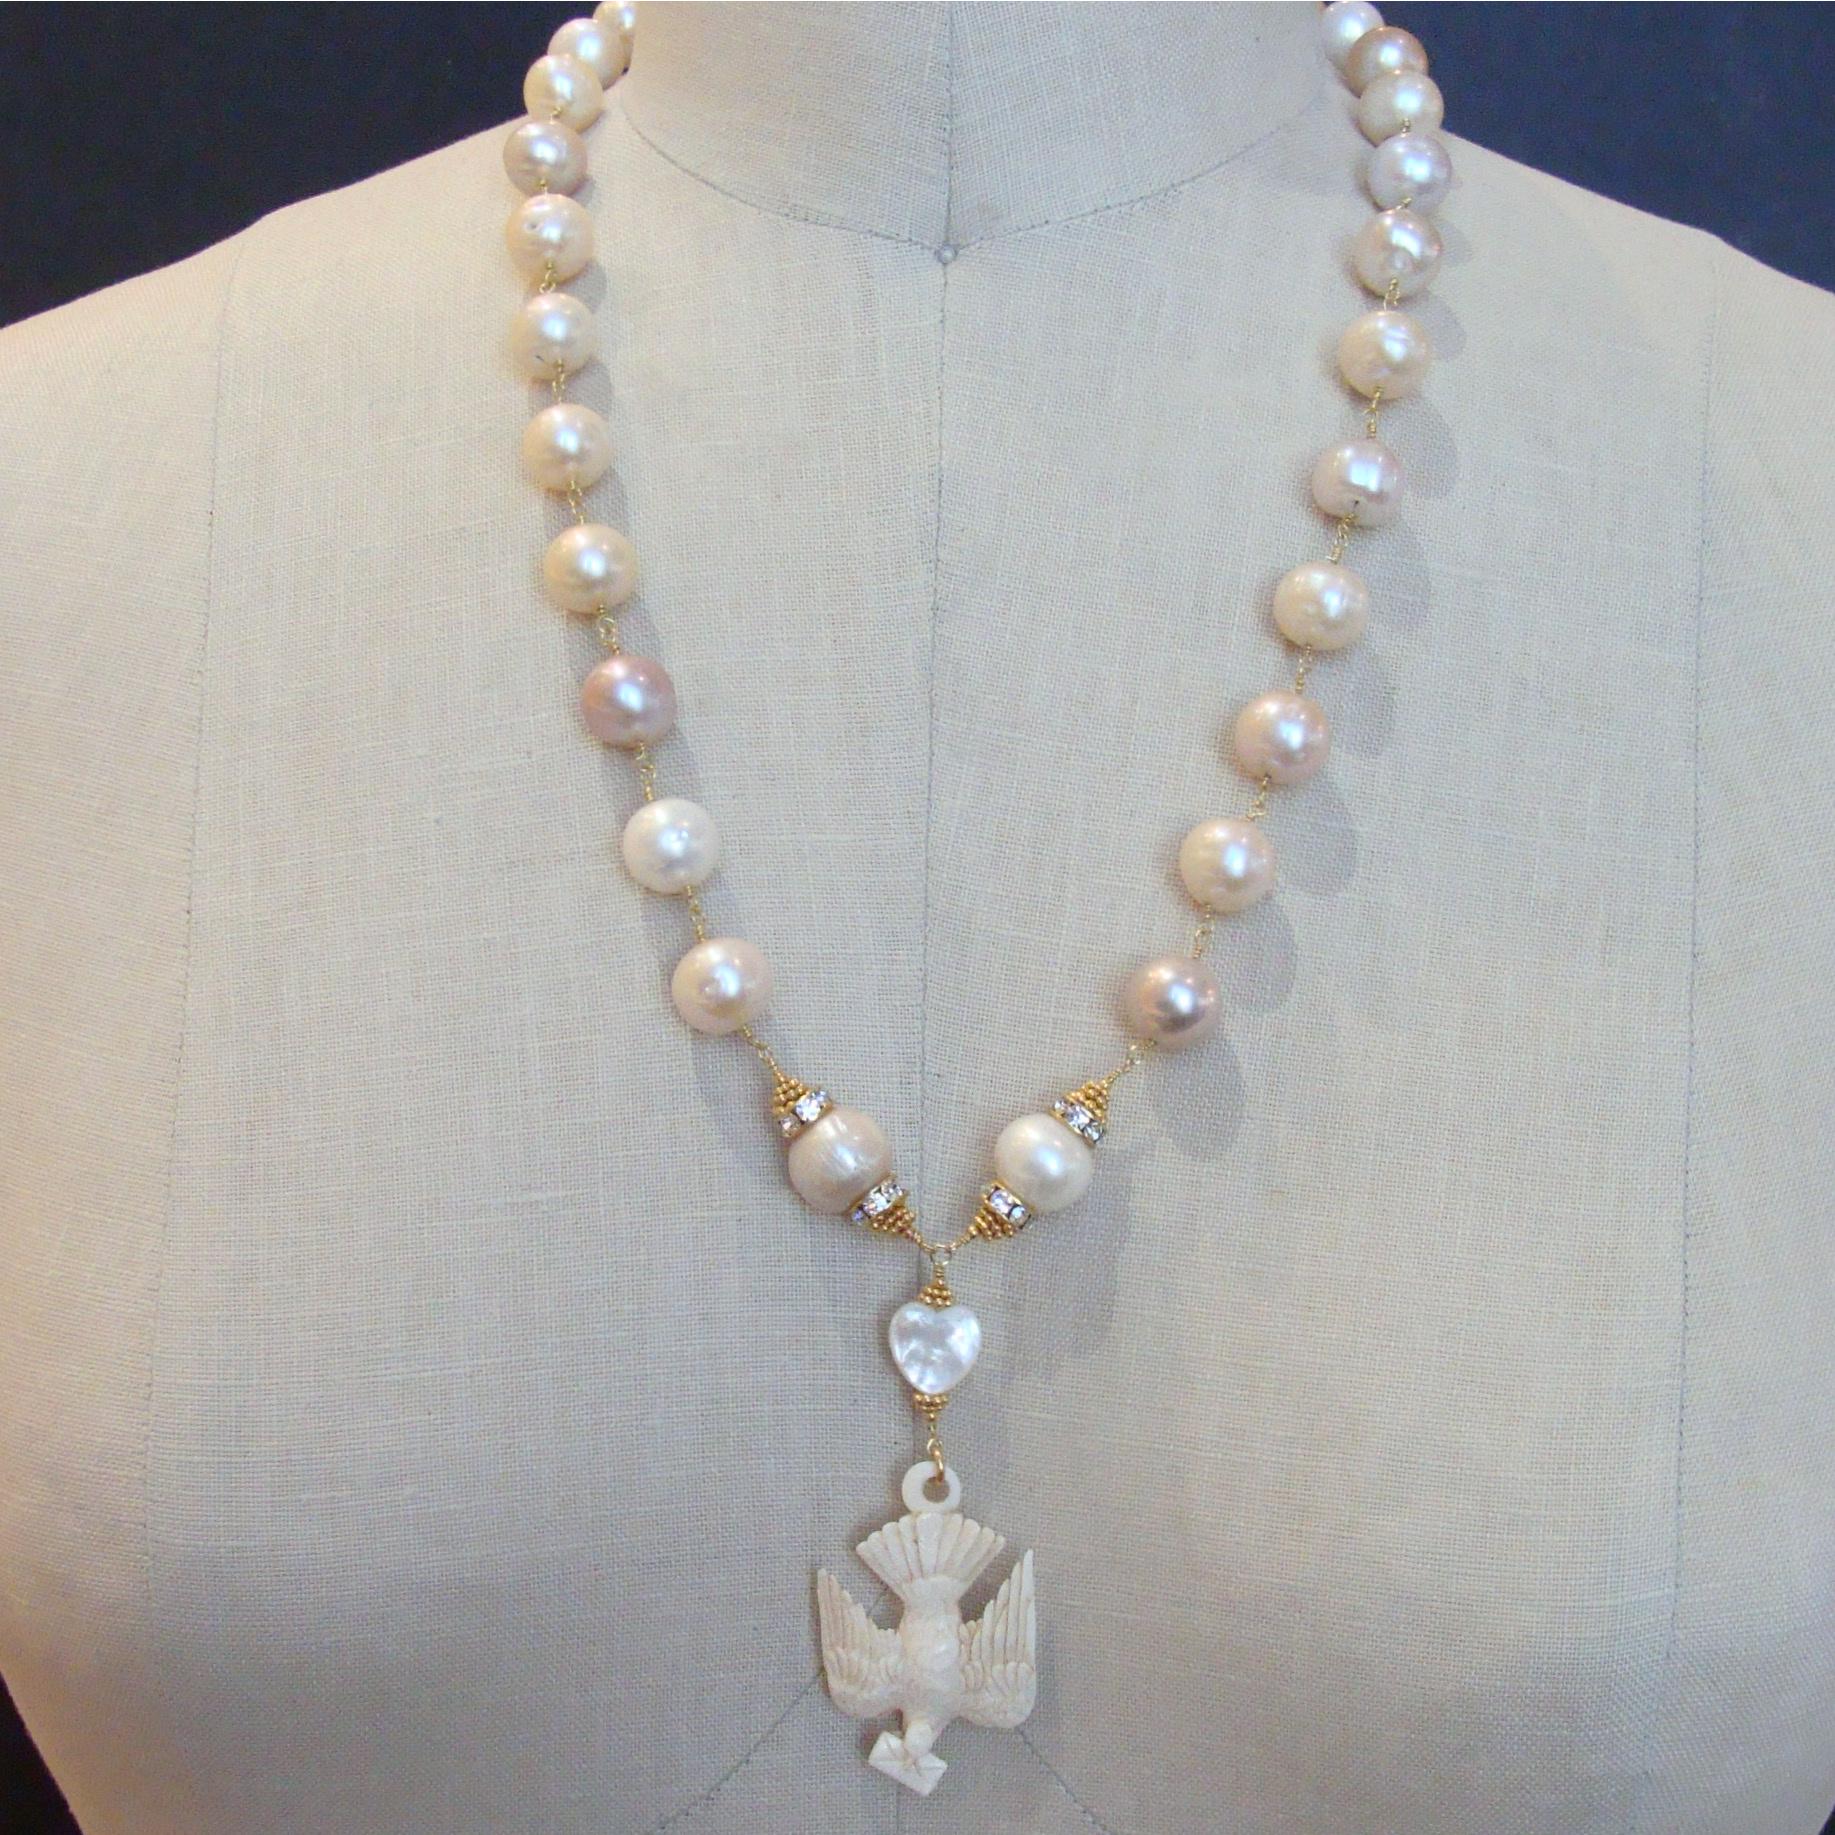 Saint Esprit Dove with Love Note Natural Pink Peach Baroque Cultured Pearls 1